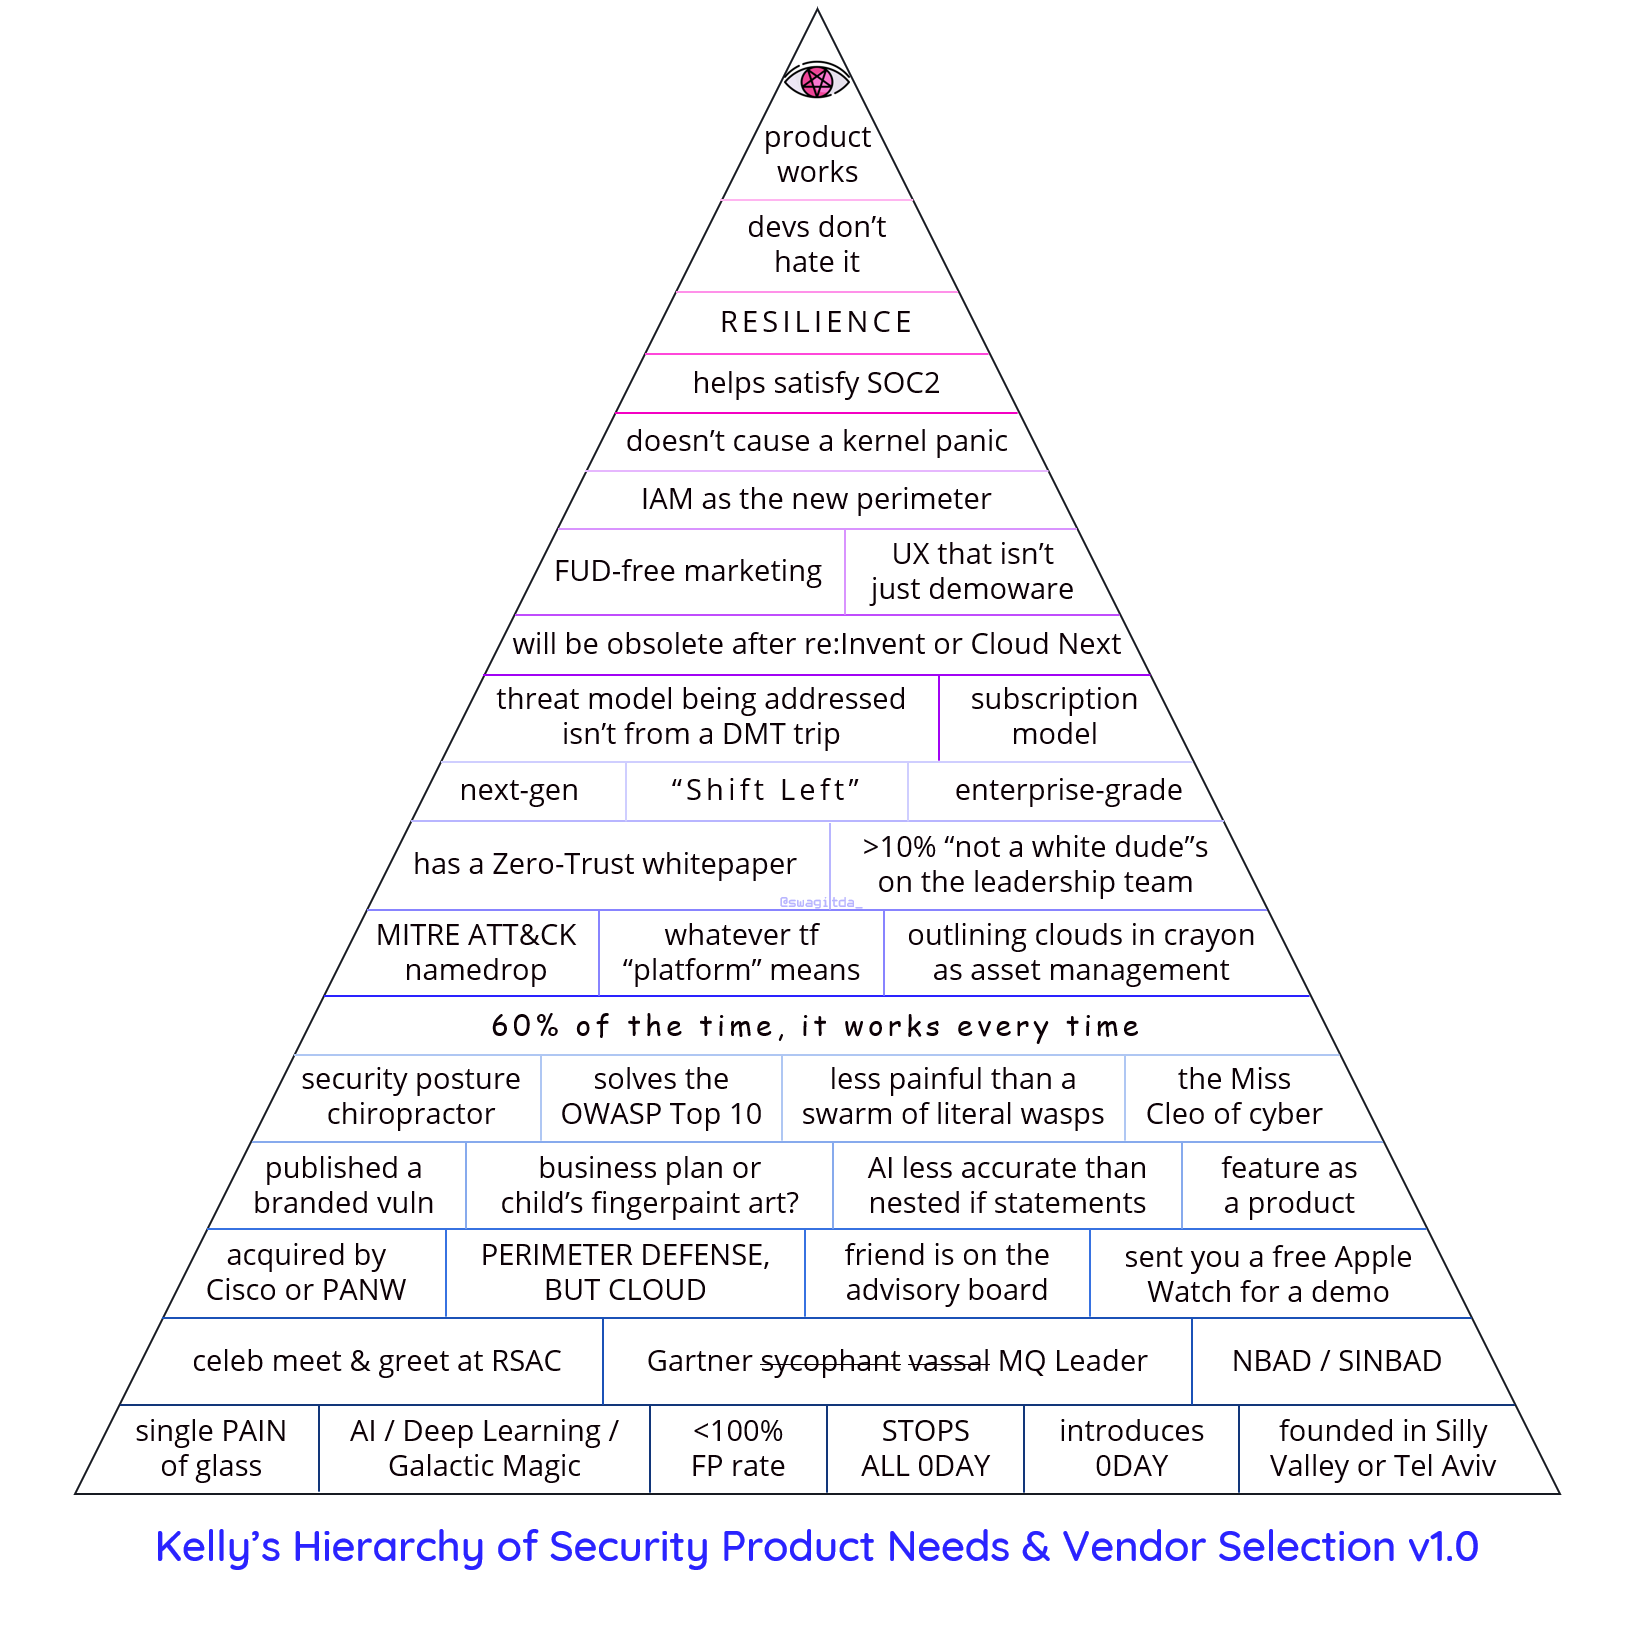 A triangle, similar to Maslow&rsquo;s hierarchy of needs, but for infosec. Starting at the bottom, the first row includes: single PAIN of glass, AI / Deep Learning / Galactic Magic, less than 100 percent false positive rate, STOPS ALL ZERO DAY, introduces 0day, founded in Silly Valley or Tel Aviv. The second row includes: celeb meet and greet at RSA, Gartner sycophant (crossed out) vassal (crossed out) Magic Quadrant Leader, NBAD / SINBAD. The third row includes: acquired by Cisco or Palo Alto Networks, PERIMETER DEFENSE BUT CLOUD, friend is on the advisory board, sent you a free Apple Watch for a demo. The fourth row includes: published a branded vulnerability, business plan or child&rsquo;s fingerpaint art?, AI less accurate than nested if statements, feature as a product. The fifth row includes: security posture chiropractor, solves the OWASP top 10, less painful than a swarm of literal wasps, the Miss Cleo of Cyber. The sixth row includes: 60 percent of the time, it works every time. The seventh row includes: MITRE ATT&CK namedrop, whatever tf platform means, outlining clouds in crayon as asset management. The eighth row includes: has a zero trust whitepaper, greater than 10 percent not-a-white-dudes on the leadership team. The ninth row includes: next-gen, &ldquo;Shift Left,&rdquo; enterprise-grade. The tenth row includes: threat model being addressed isn&rsquo;t from a DMT trip, subscription model. The eleventh row includes: will be obsolete after re:Invent or Cloud Next. The twelfth row includes: FUD-free marketing, UX that isn&rsquo;t just demoware. The thirteenth row includes: IAM as the new perimeter. The fourteenth row includes: doesn&rsquo;t cause a kernel panic. The fifteenth row includes: helps satisfy SOC2. The sixteenth row includes: resilience. The seventeenth row includes: developers don&rsquo;t hate it. The eighteenth row includes: product works. There is also an eye with a hot pink iris and a hexagram pupil at the top, for flare.